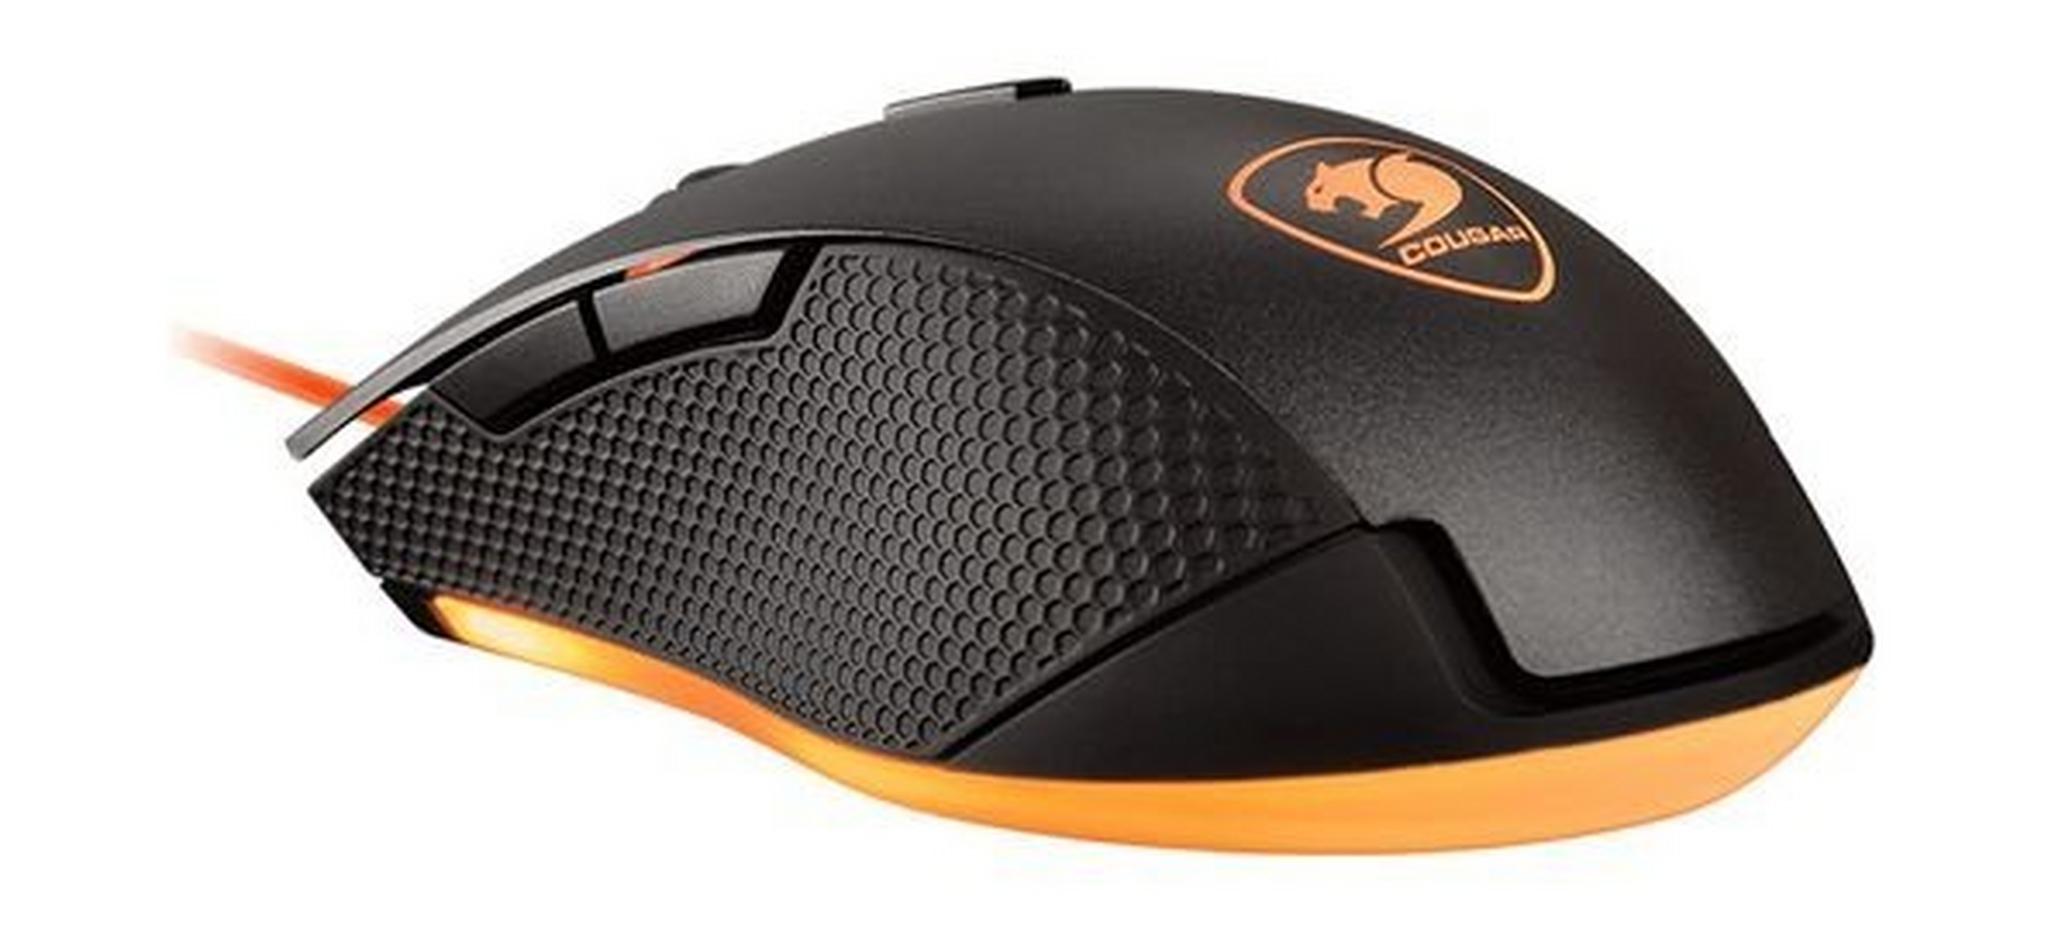 Cougar Minos X2 Wired Mouse